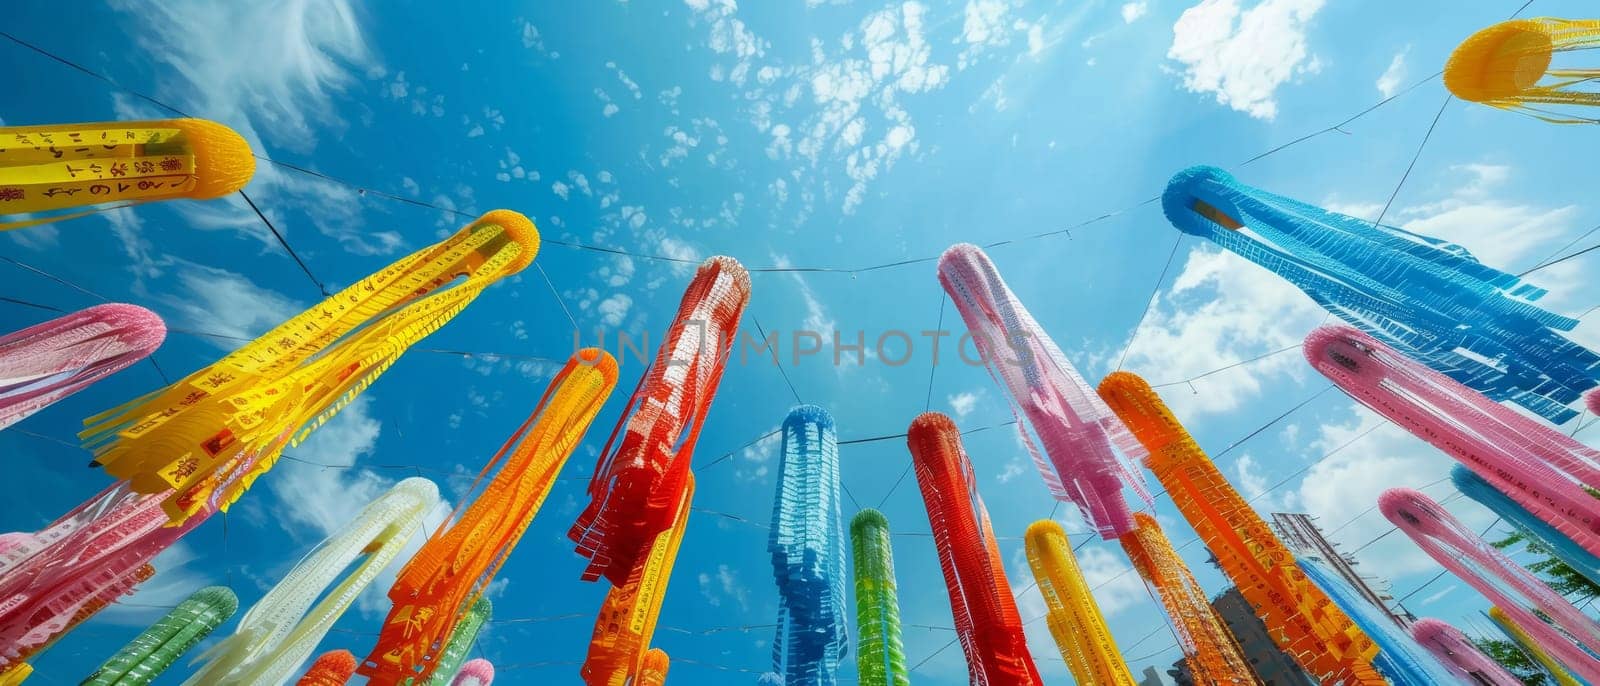 A striking view of Tanabata festival streamers flowing in the wind against a clear blue sky, symbolizing hopes and dreams during the festive season